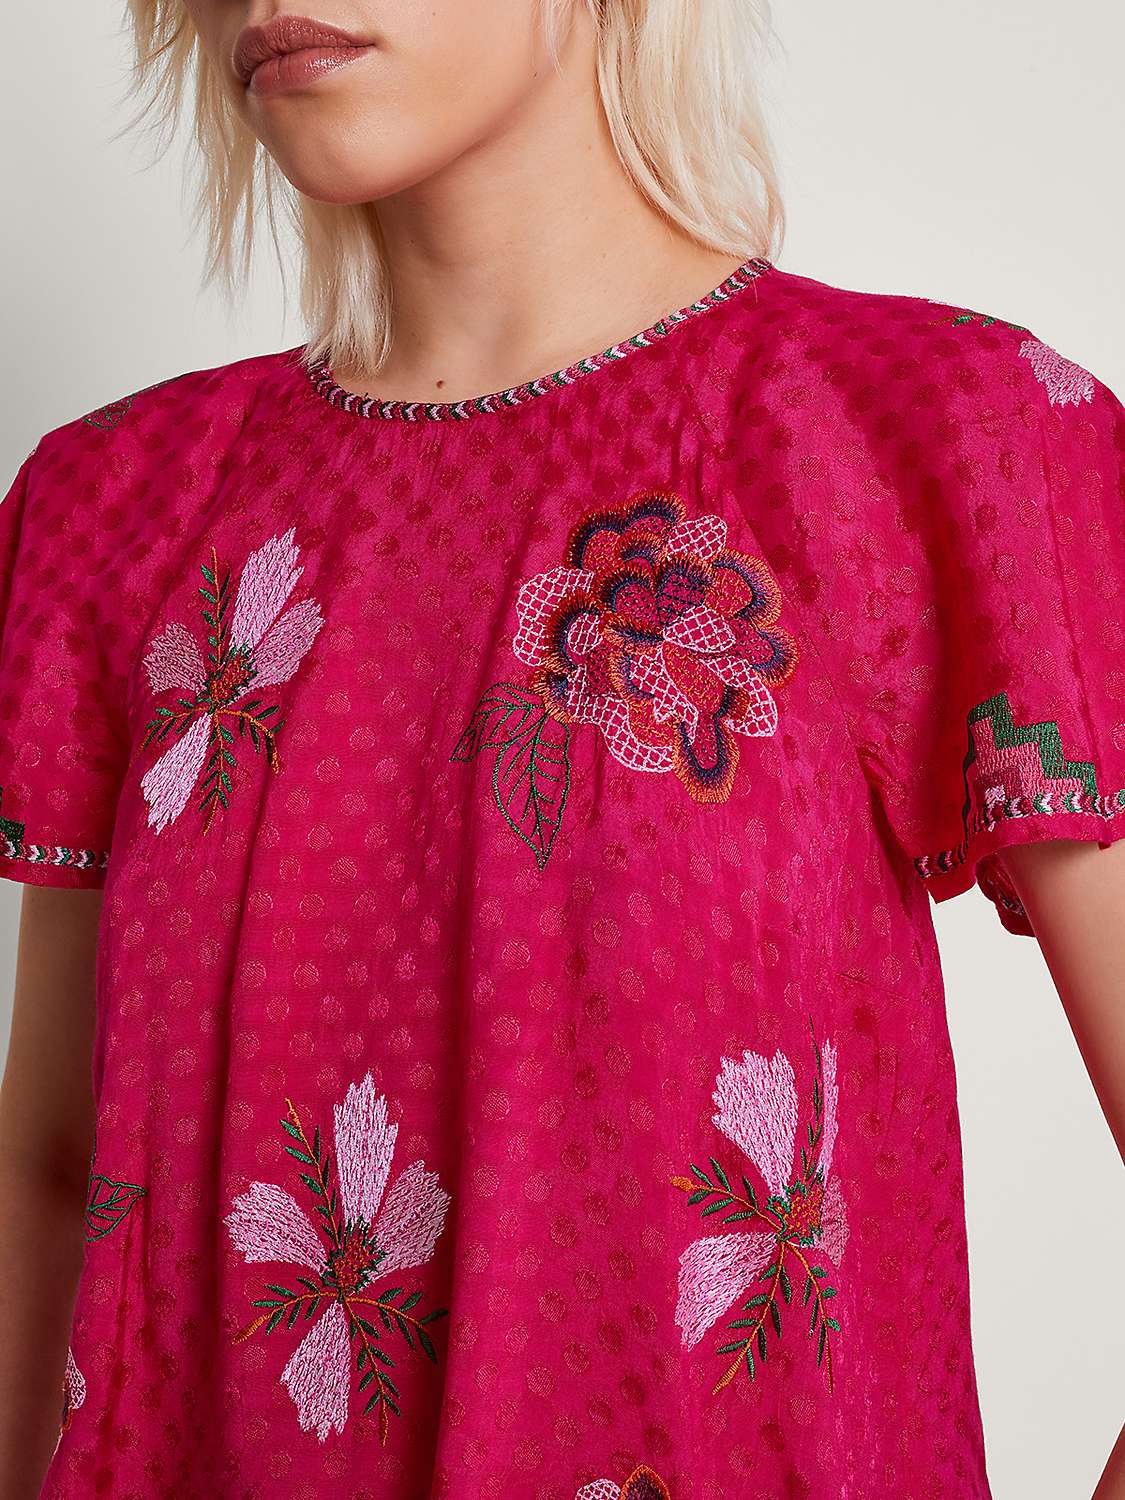 Buy Monsoon Everly Embroidered Blouse, Pink Online at johnlewis.com